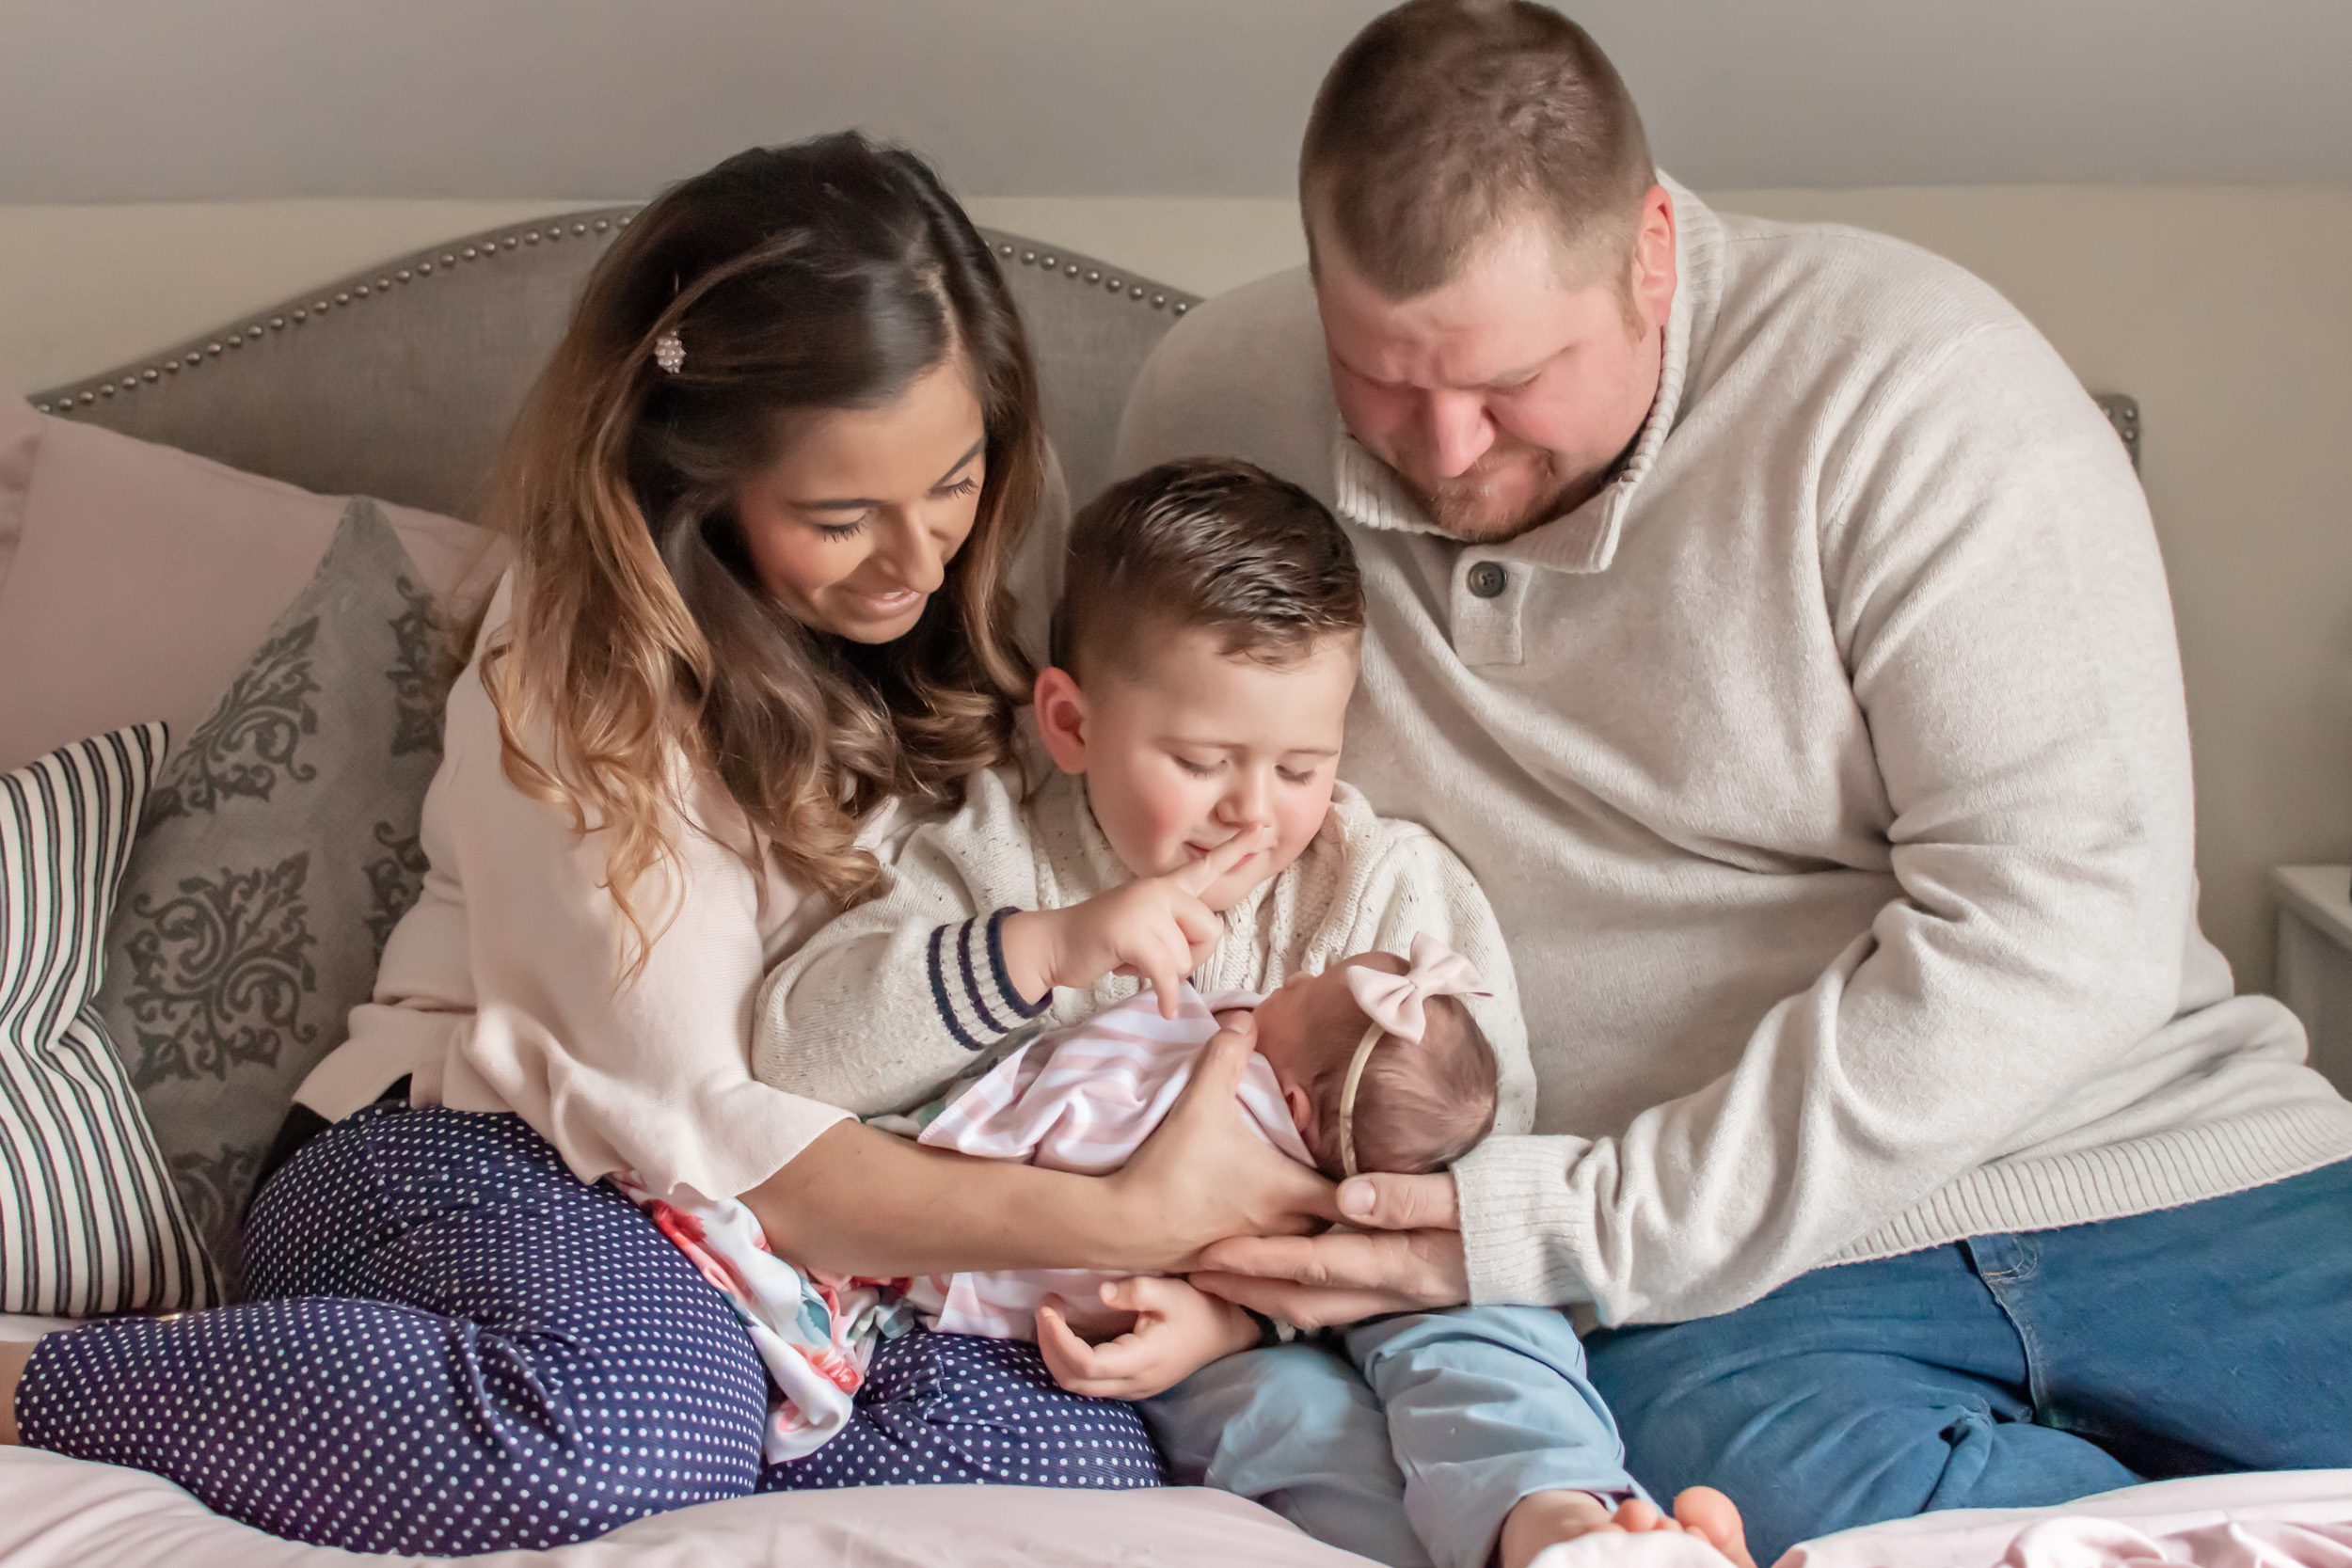 Newborn picture of older brother on his parents' lap holding his baby sister and comforting her during an in home newborn photography session